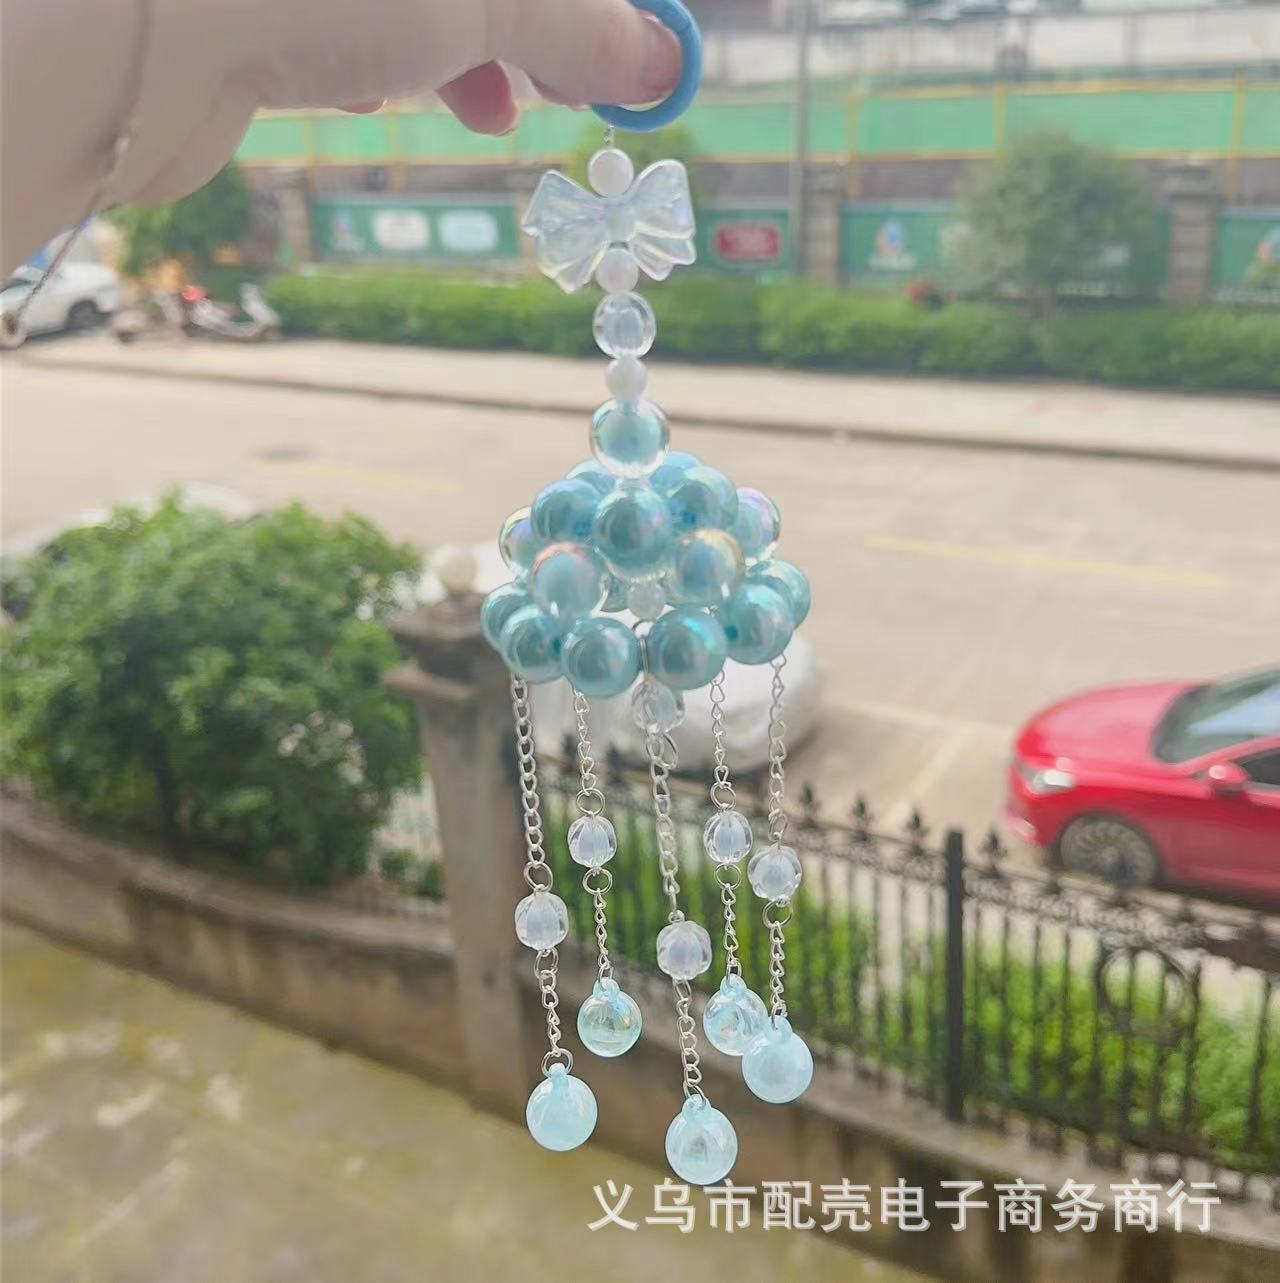 New Car Car Pendant Handmade Diy Wind Chimes Pendant Car Interior Hanging Accessories Quality Products Live Blind Box Wholesale